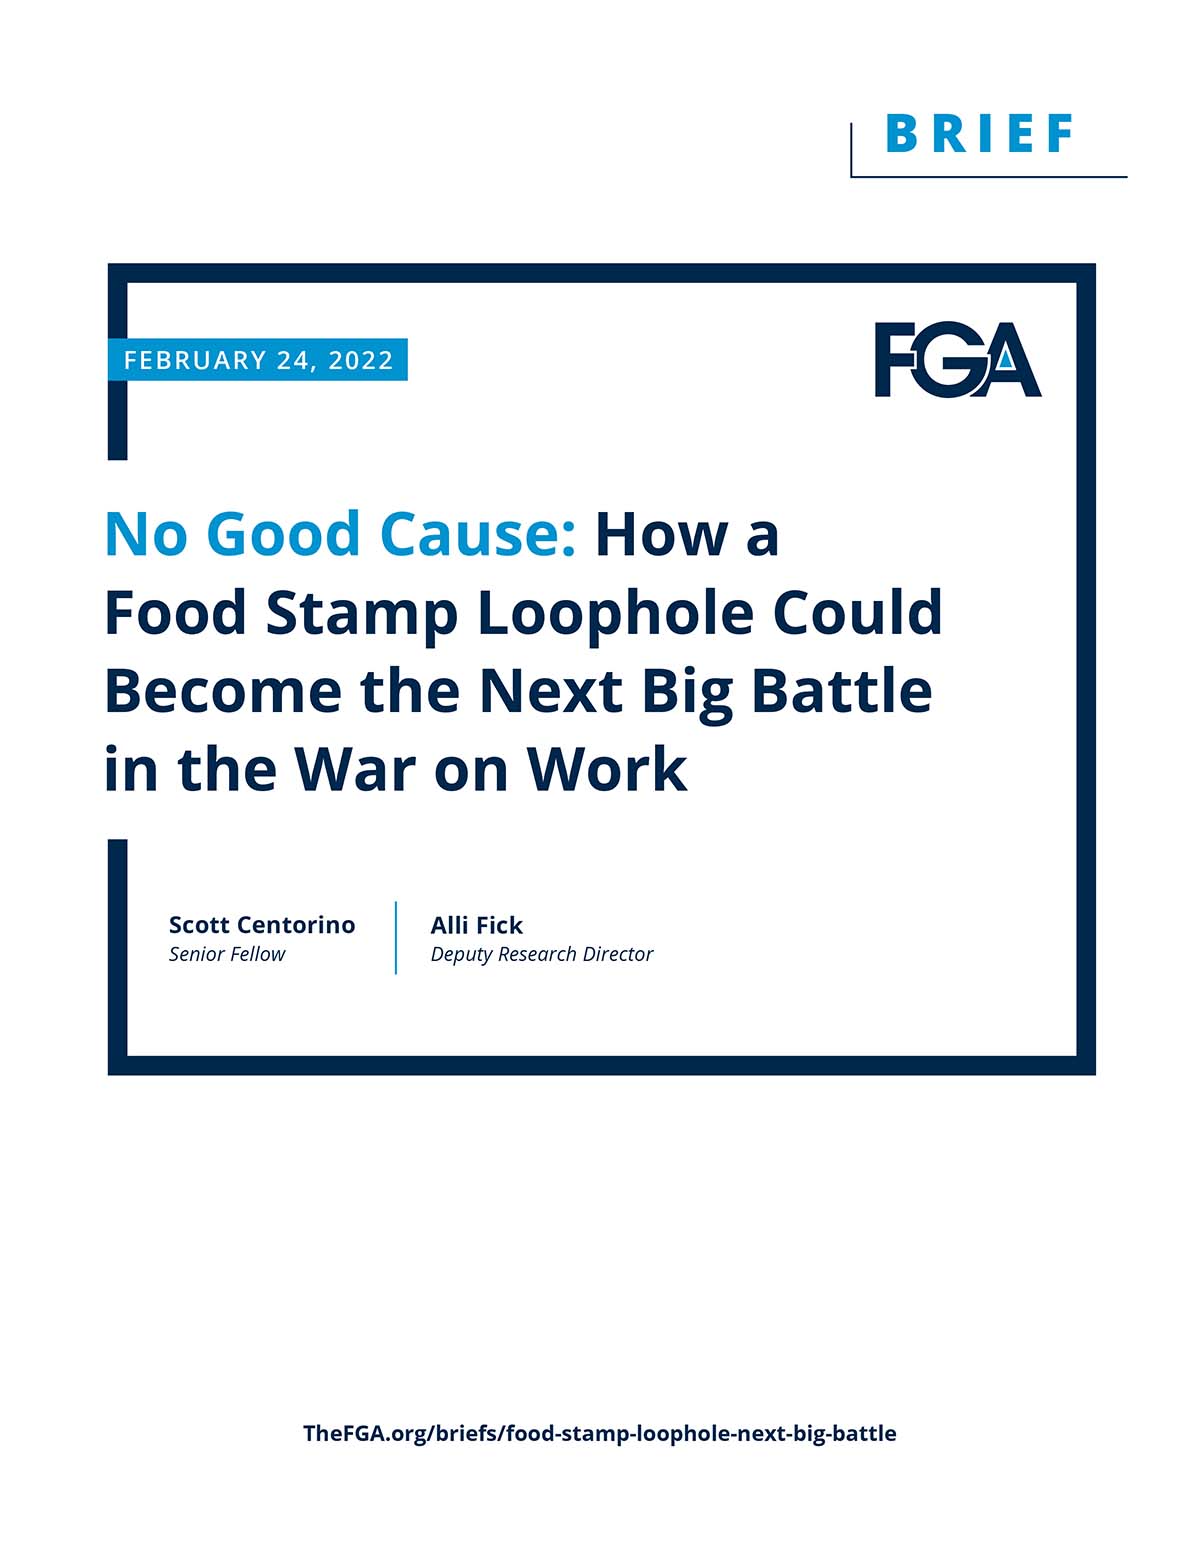 No Good Cause: How a Food Stamp Loophole Could Become the Next Big Battle in the War on Work